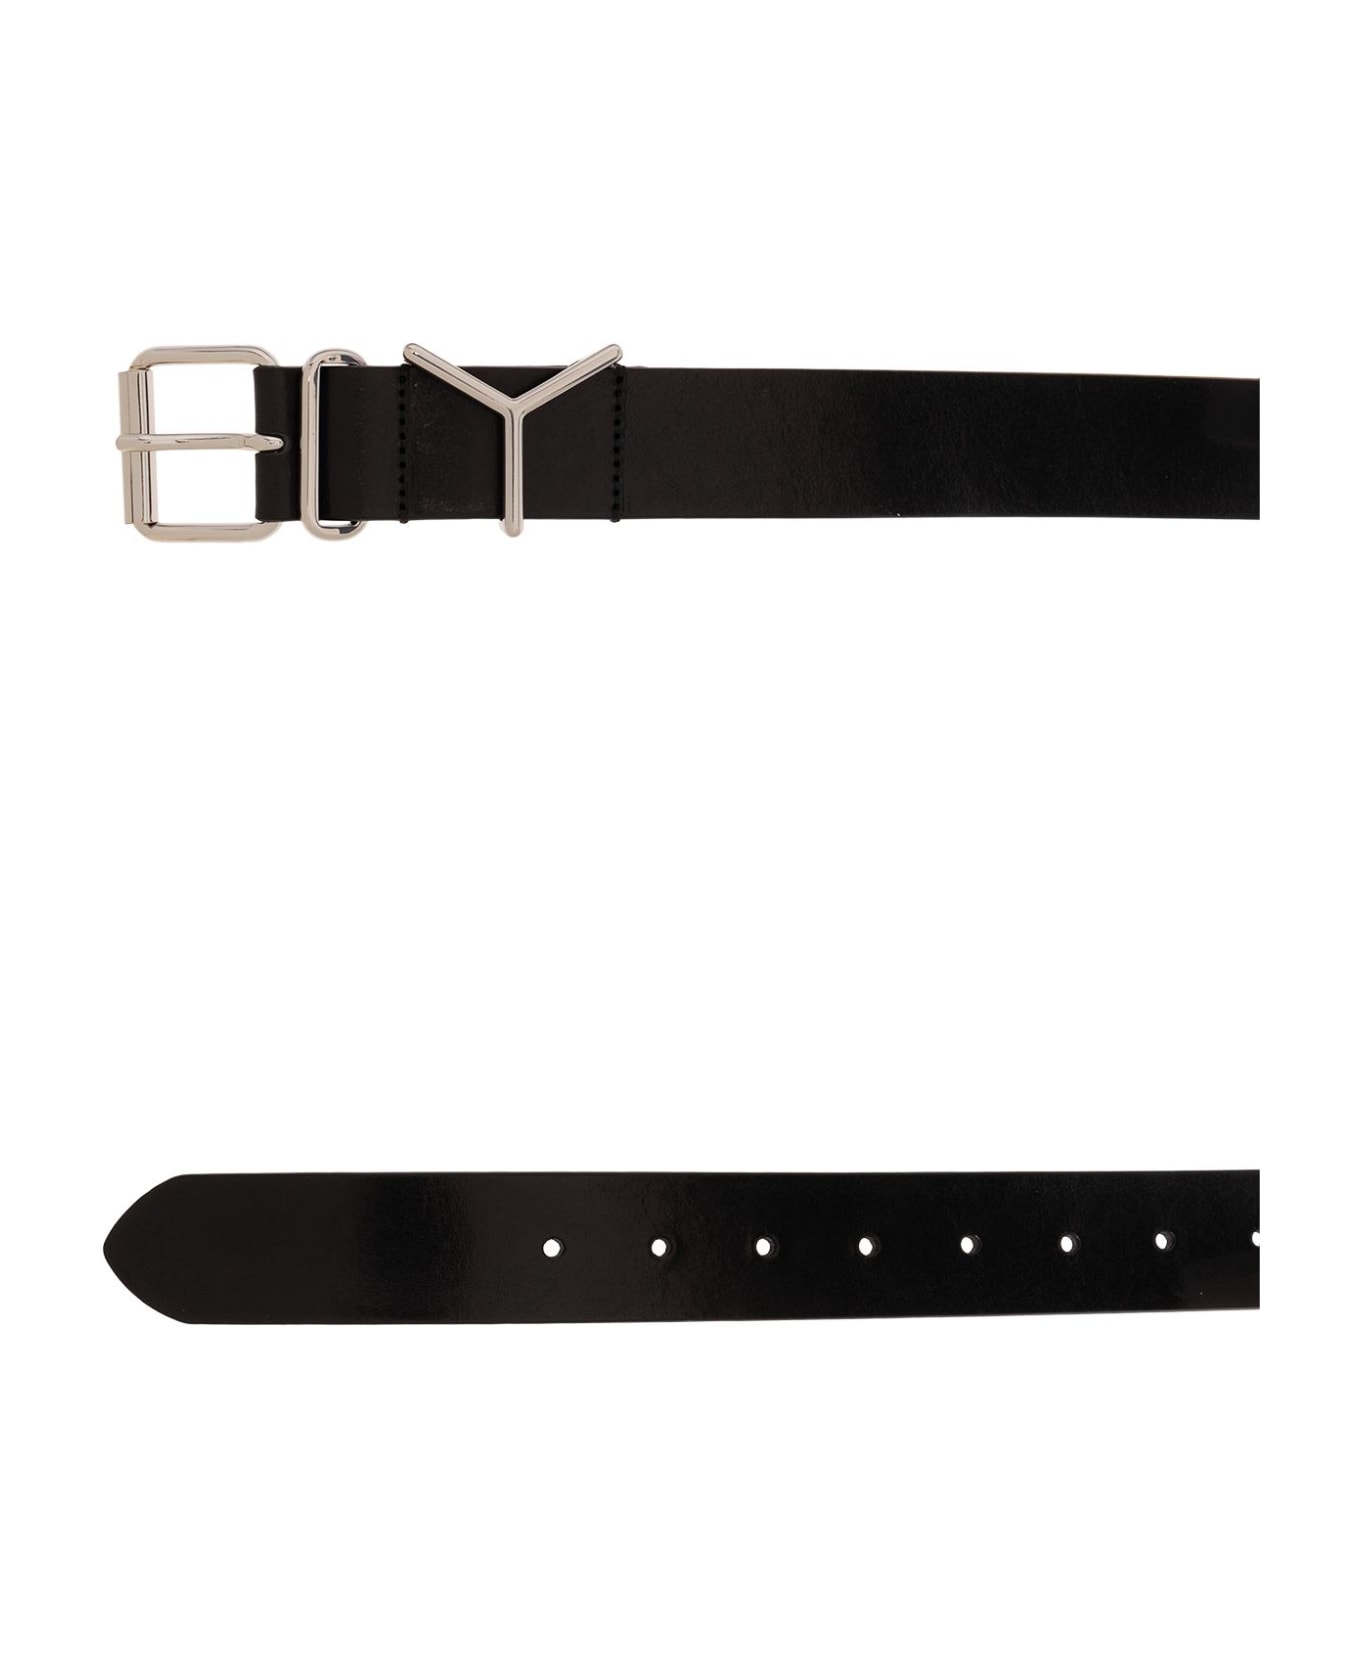 Y/Project Y Project Leather Belt - BLACK ベルト